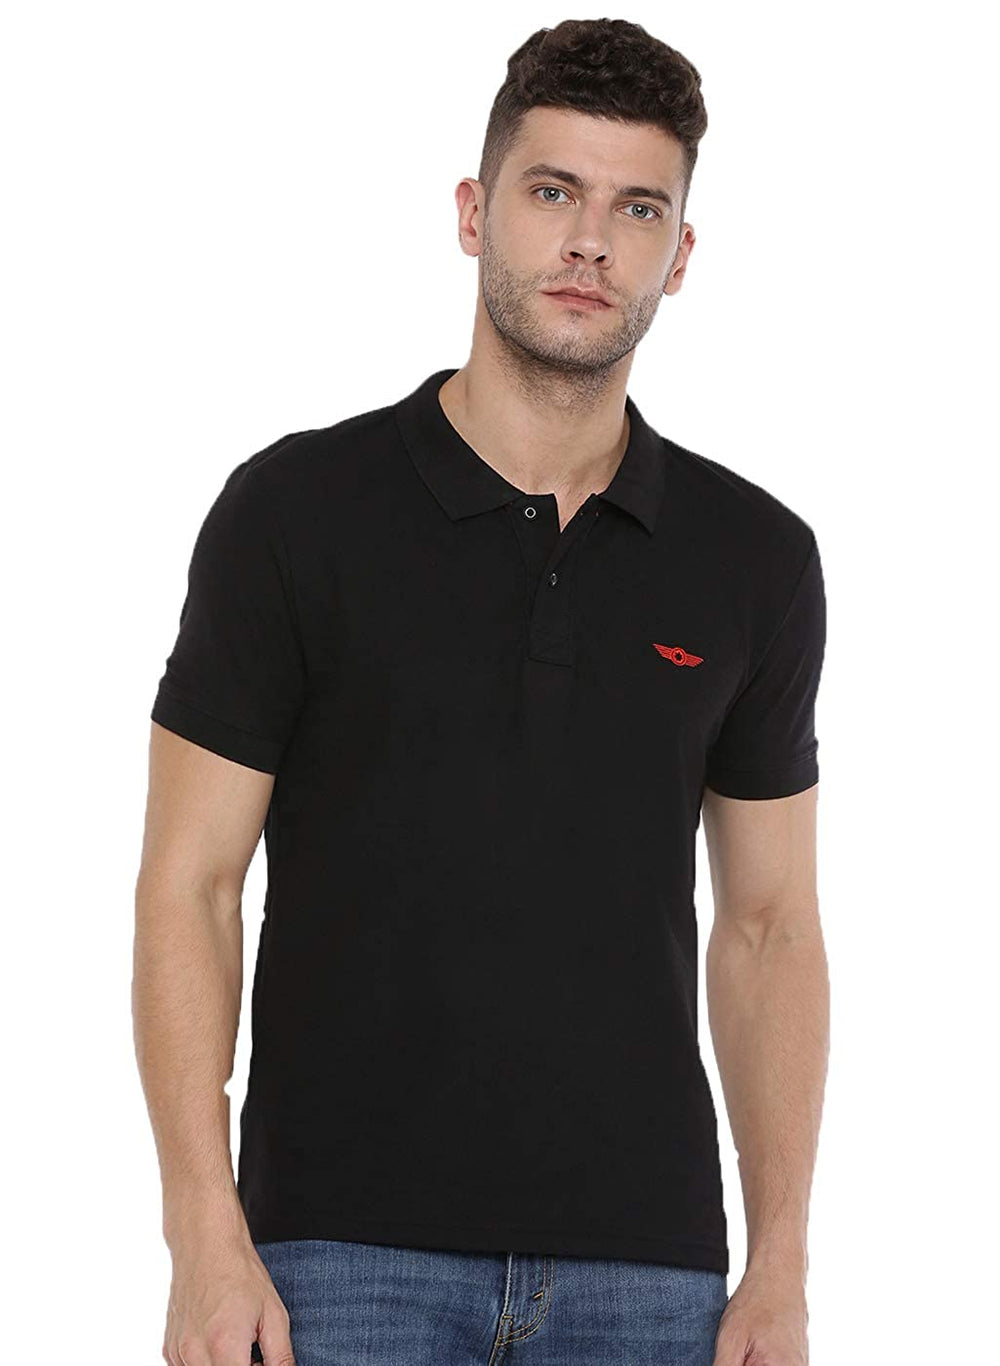 Black Slim Fit Polo Neck T-Shirt with collar for Men